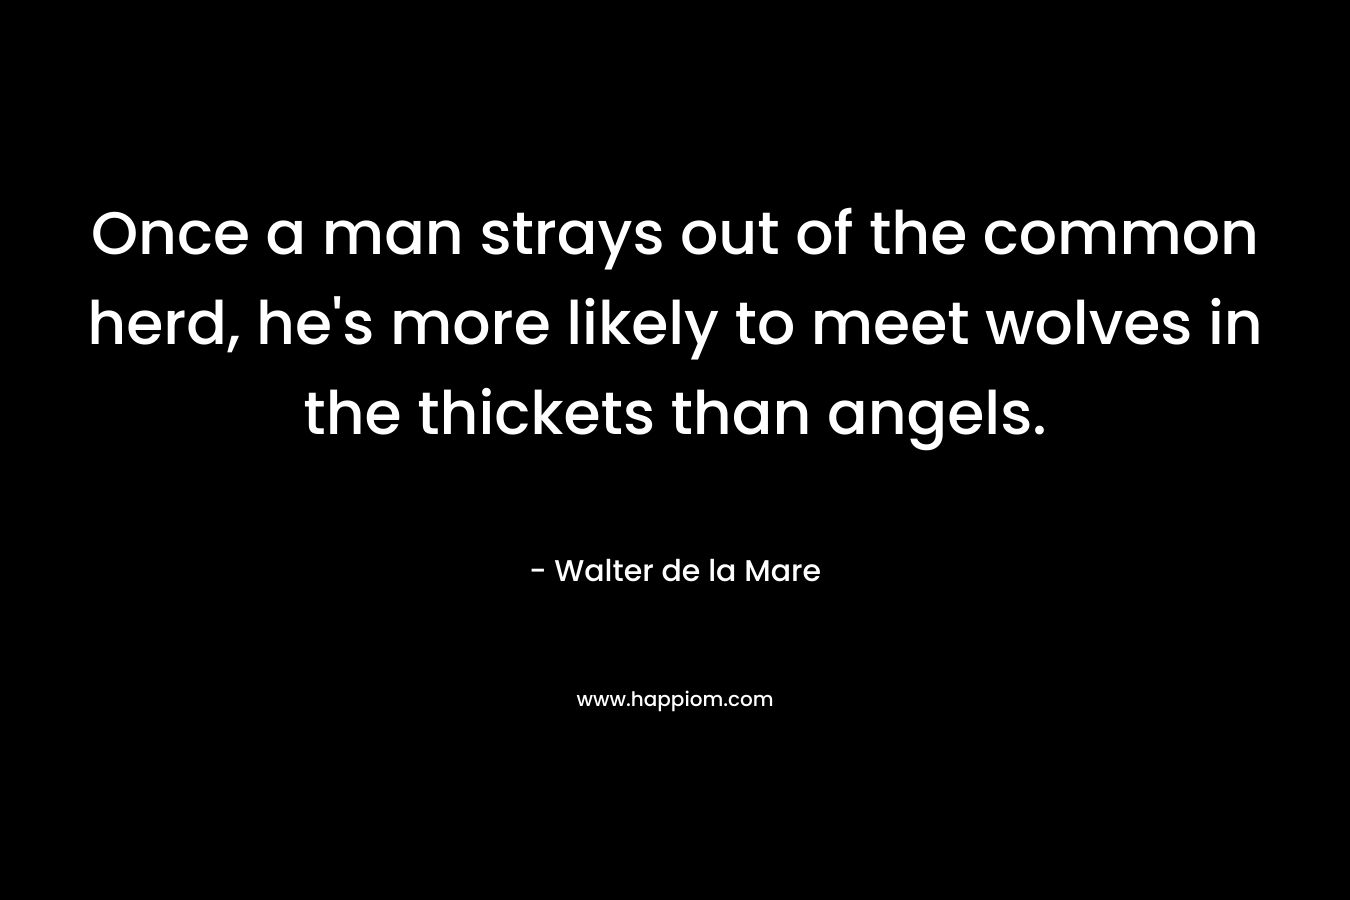 Once a man strays out of the common herd, he’s more likely to meet wolves in the thickets than angels. – Walter de la Mare